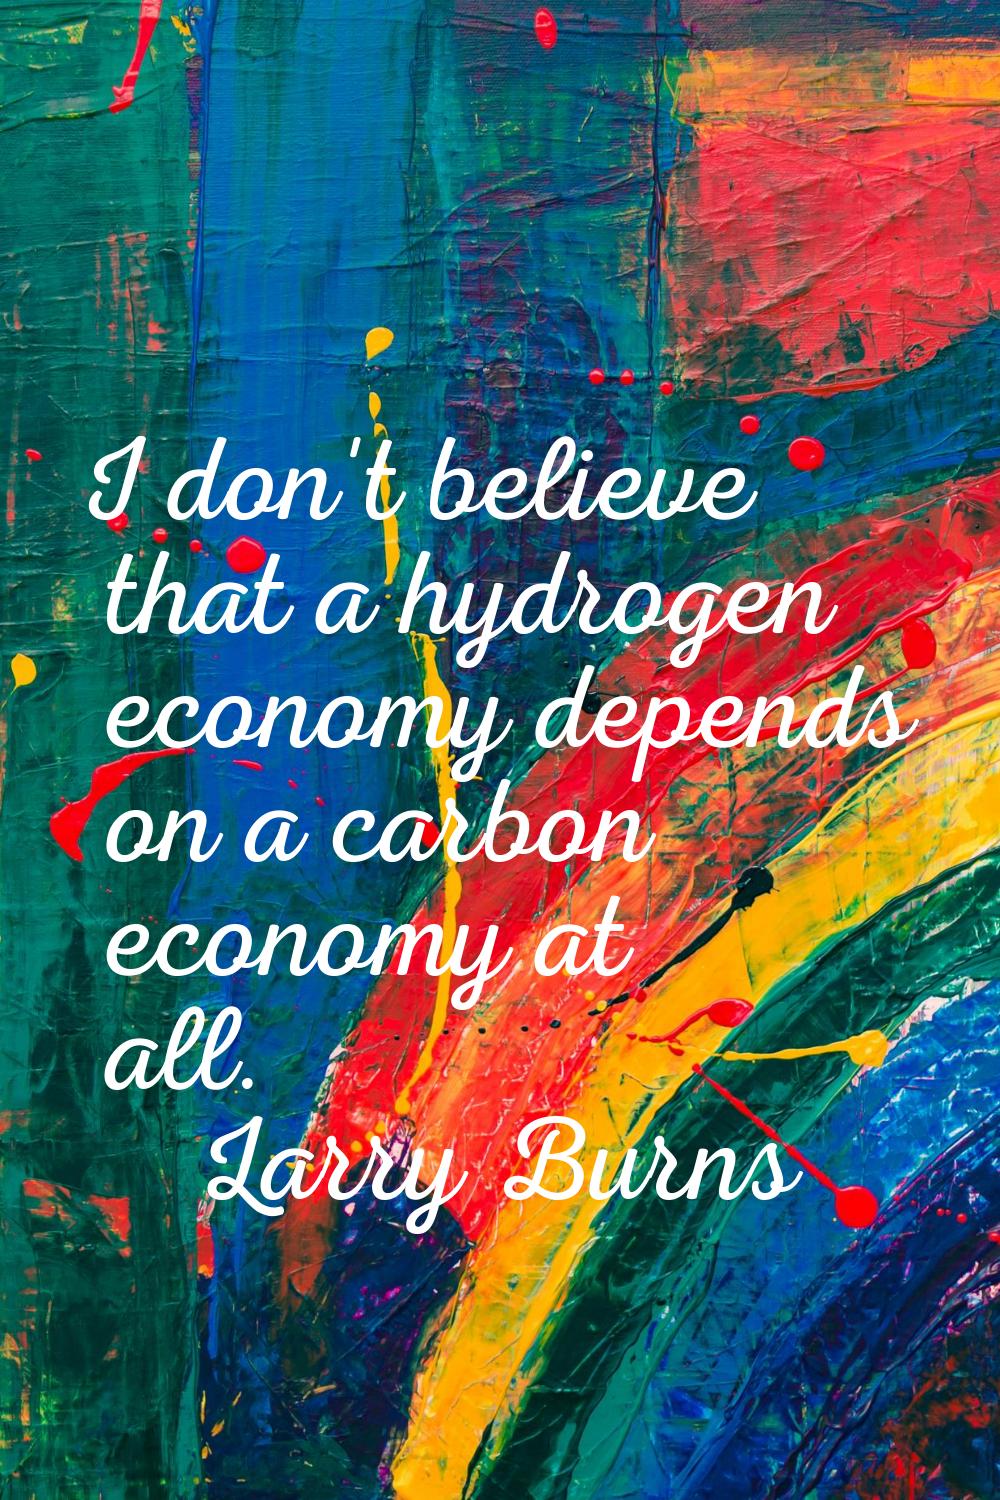 I don't believe that a hydrogen economy depends on a carbon economy at all.